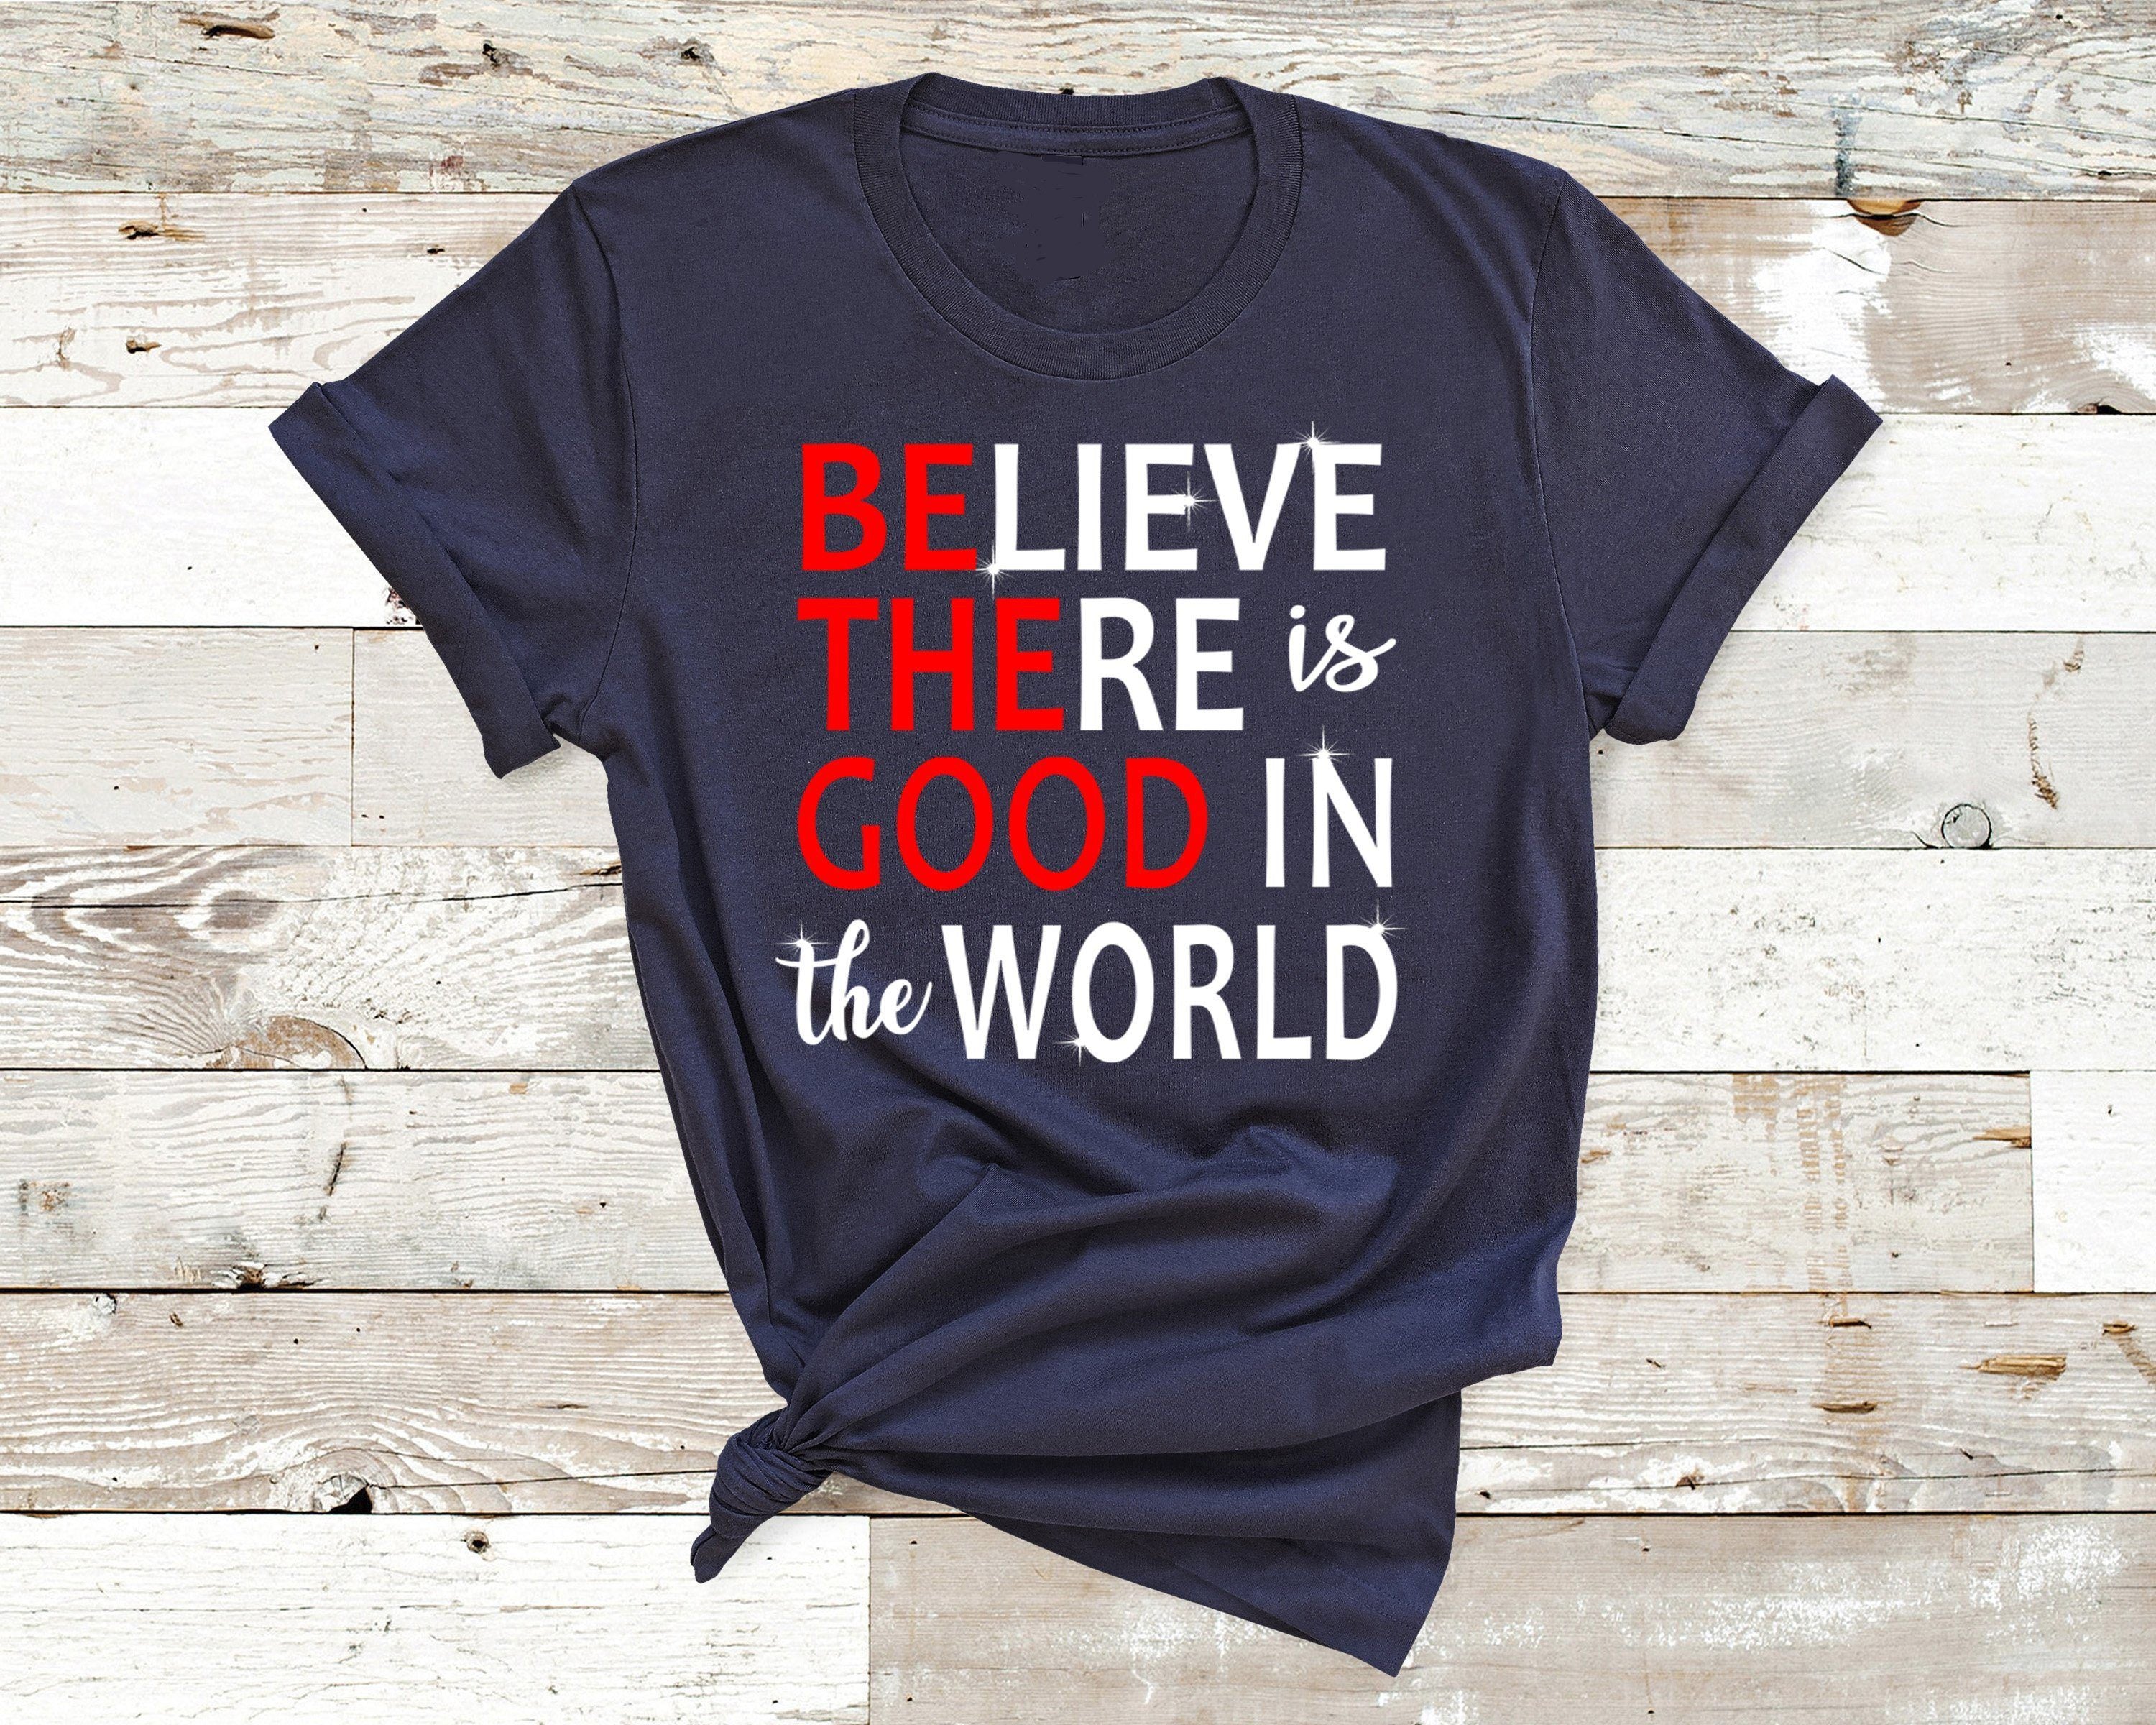 "BELIEVE there is good in the world"